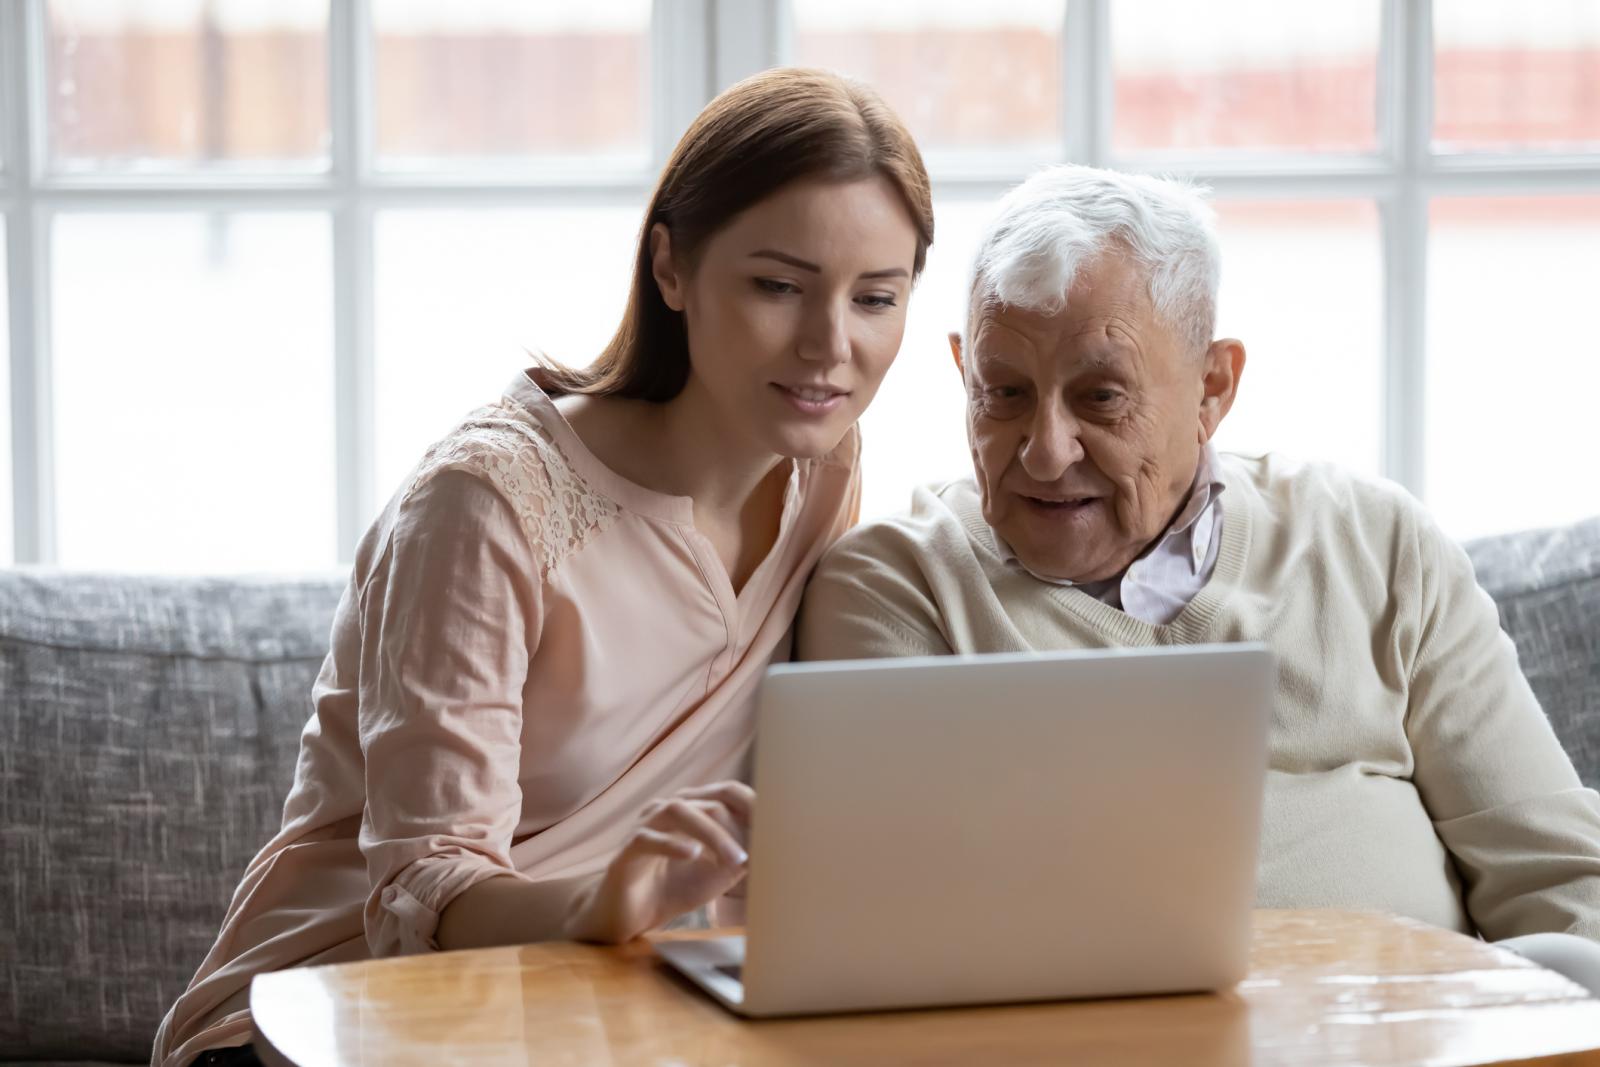 (How to) support digital engagement among older people at risk of isolation